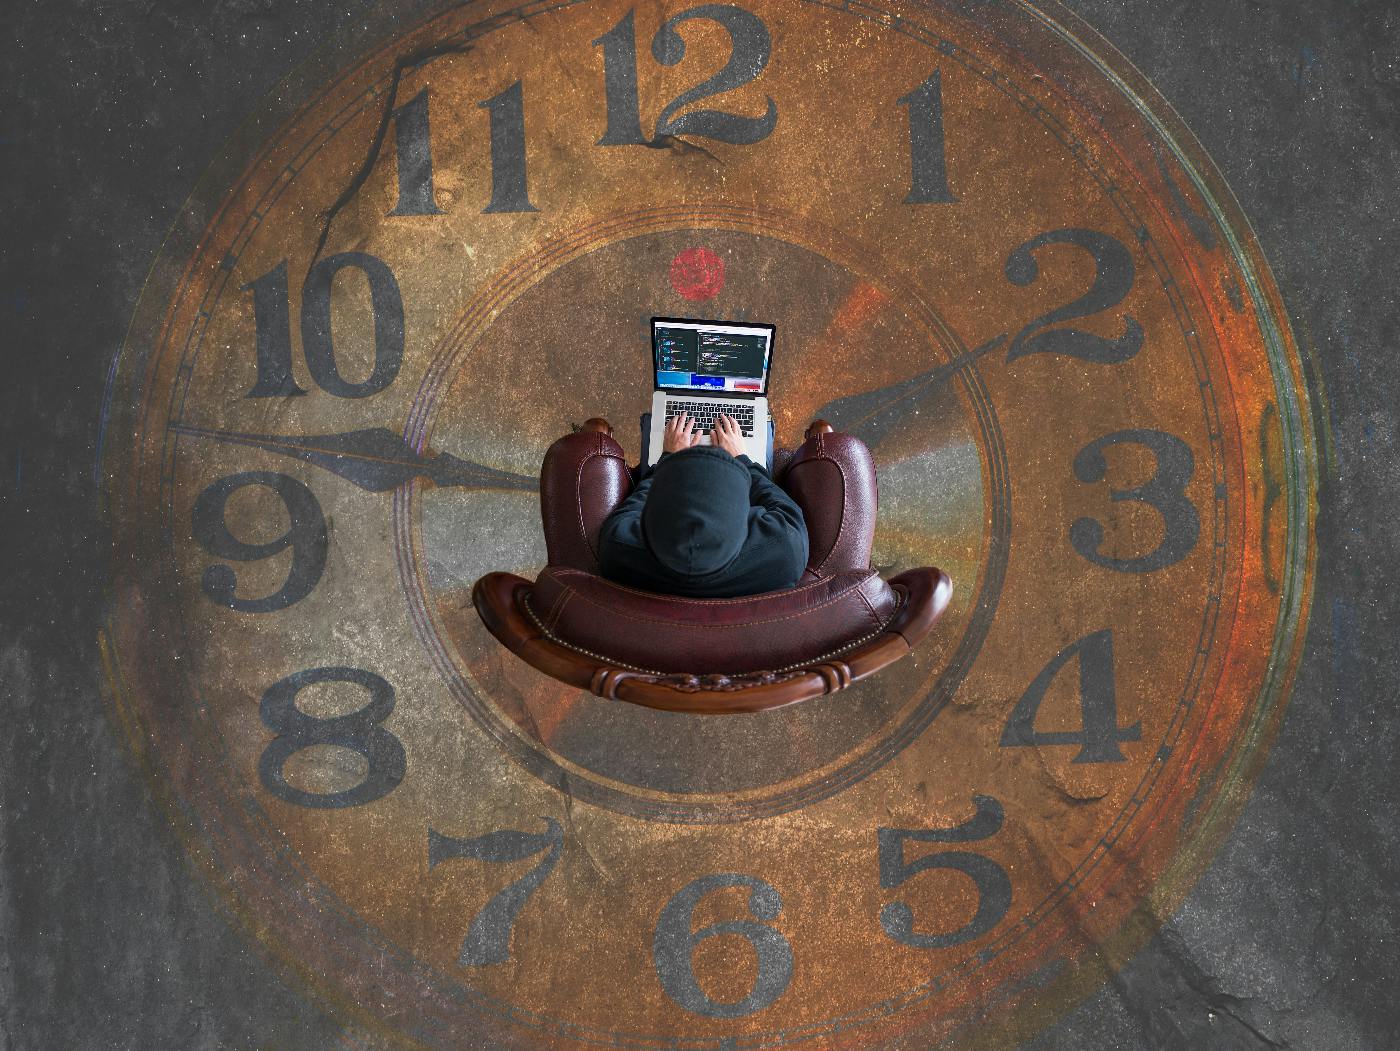 An overheard view of a person in a hoodie sitting in a leather chair on a floor that is painted like a clock face